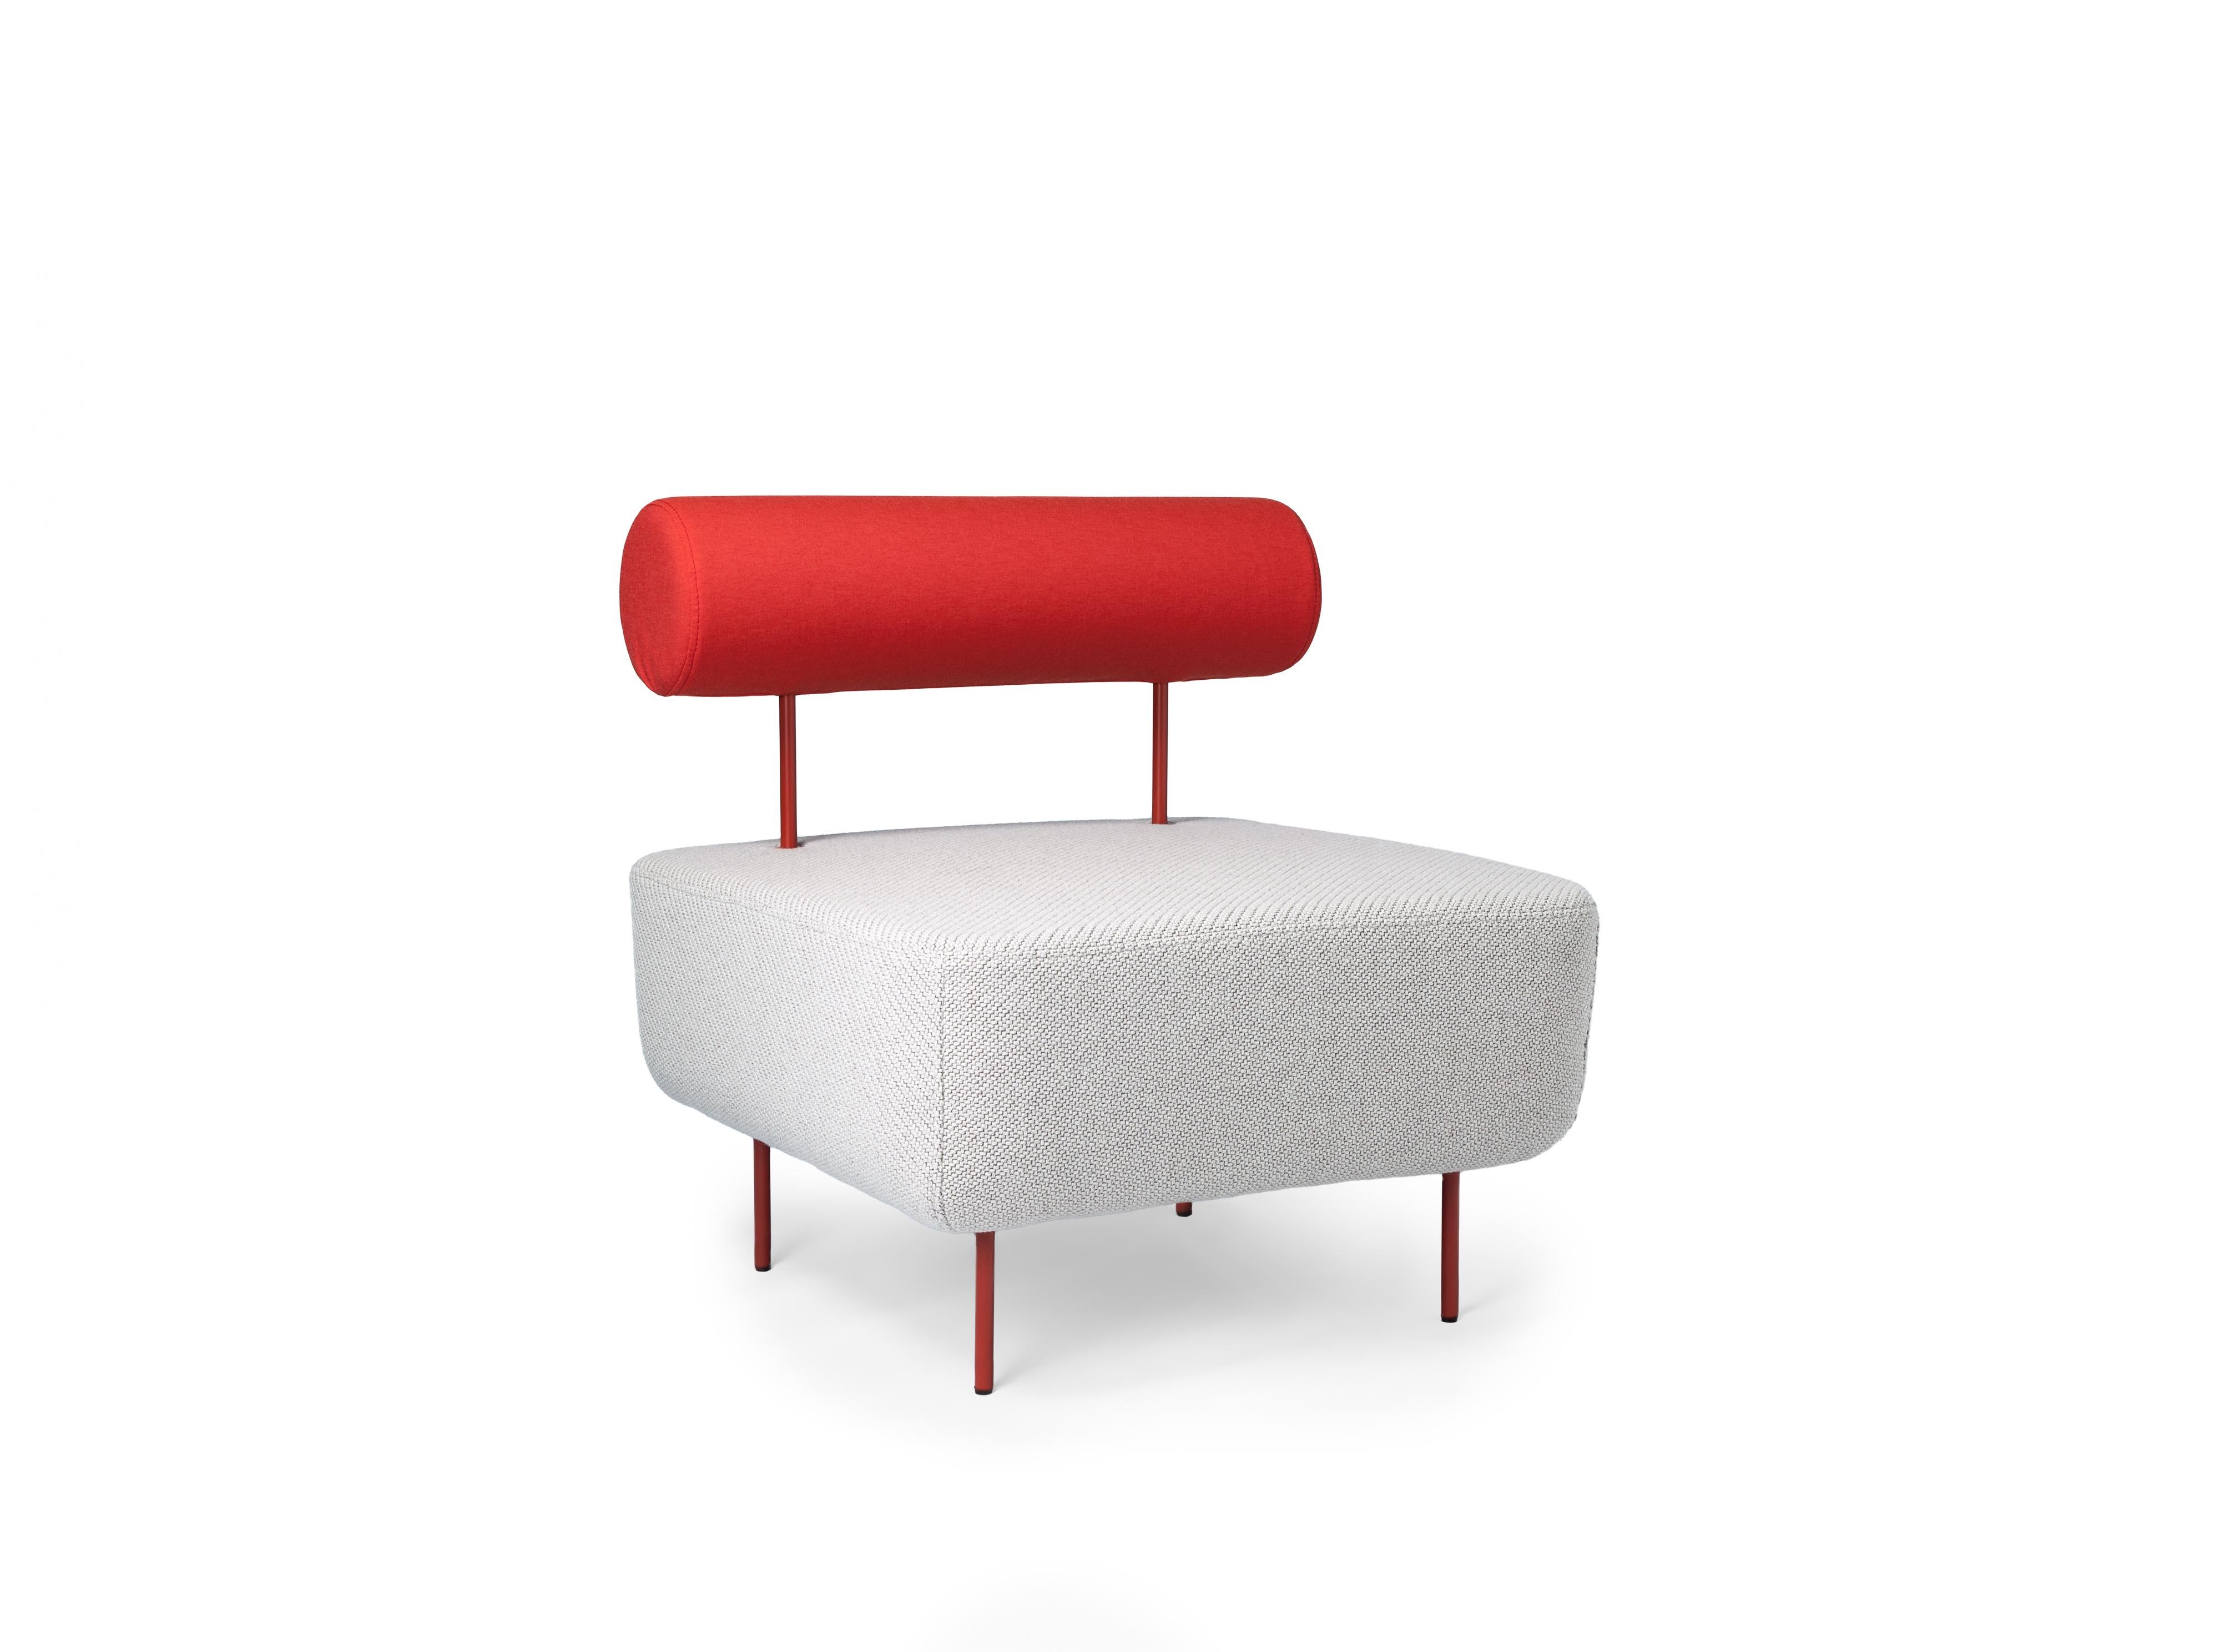 Petite Friture Medium Hoff Armchair in White and Red by Morten & Jonas, 2015

Hoff created by designer duo Morten & Jonas is a collection of two modular stools and two modular armchairs. they can combine to make a sofa as well an entire living